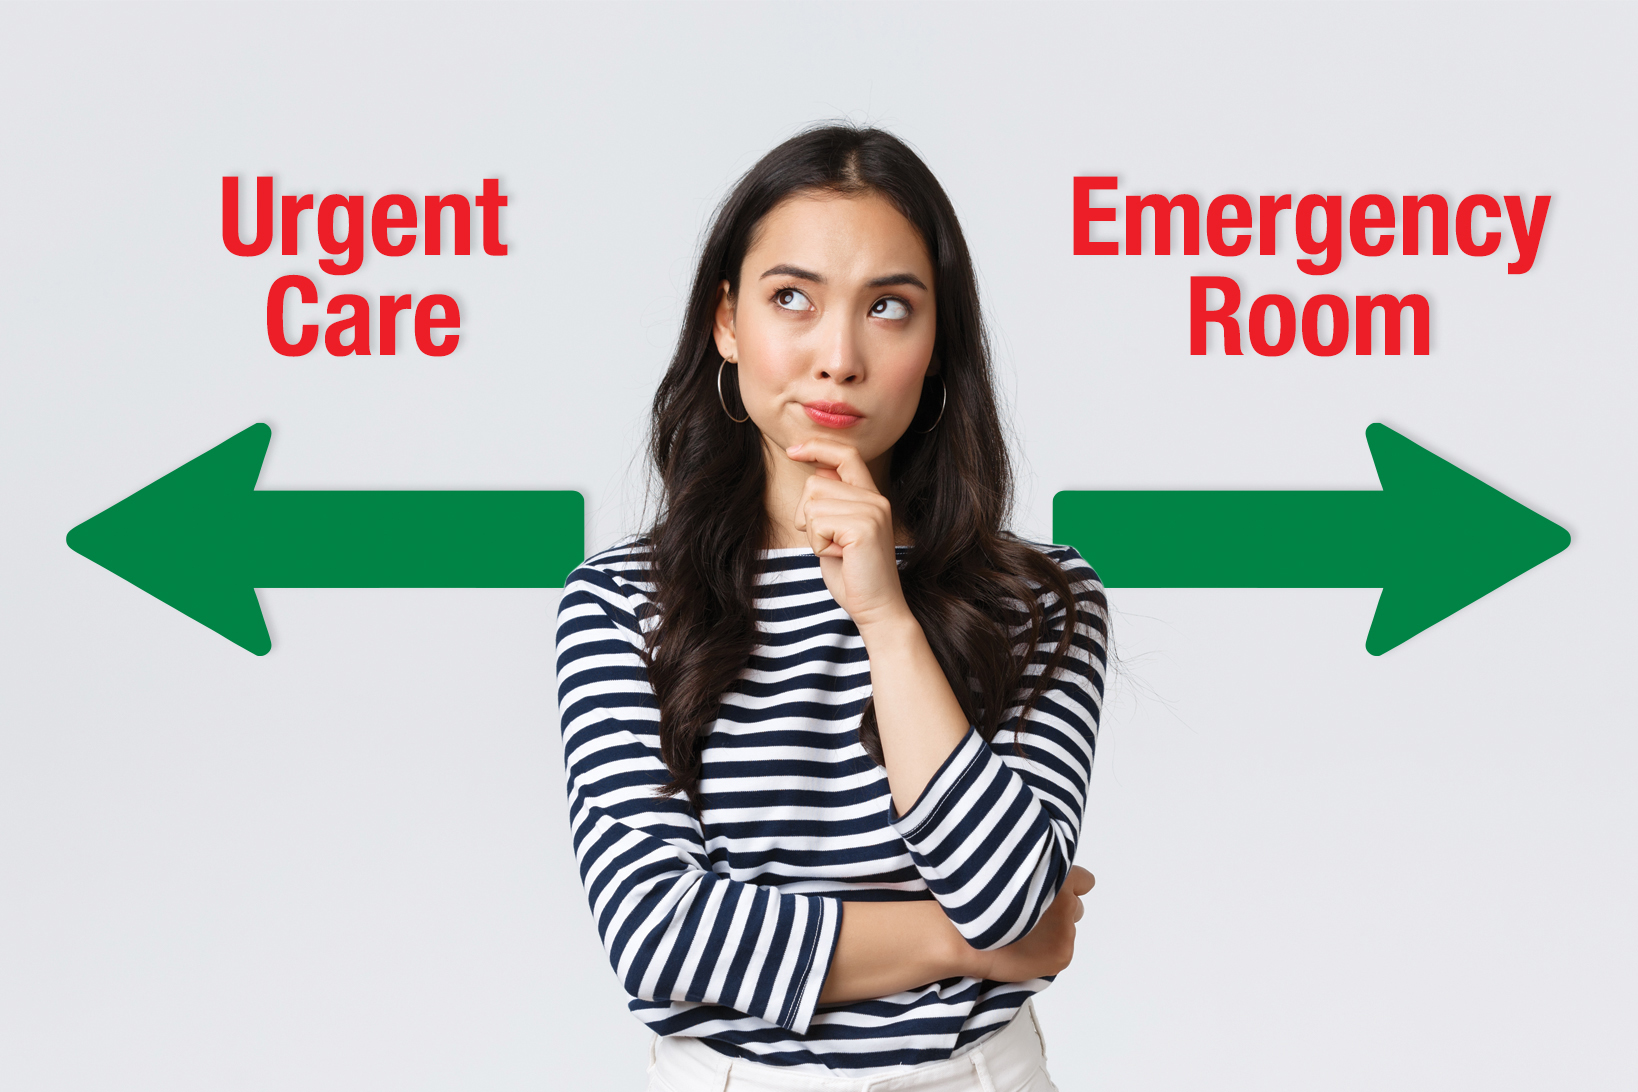 Woman pondering whether to go to the ER or urgent care